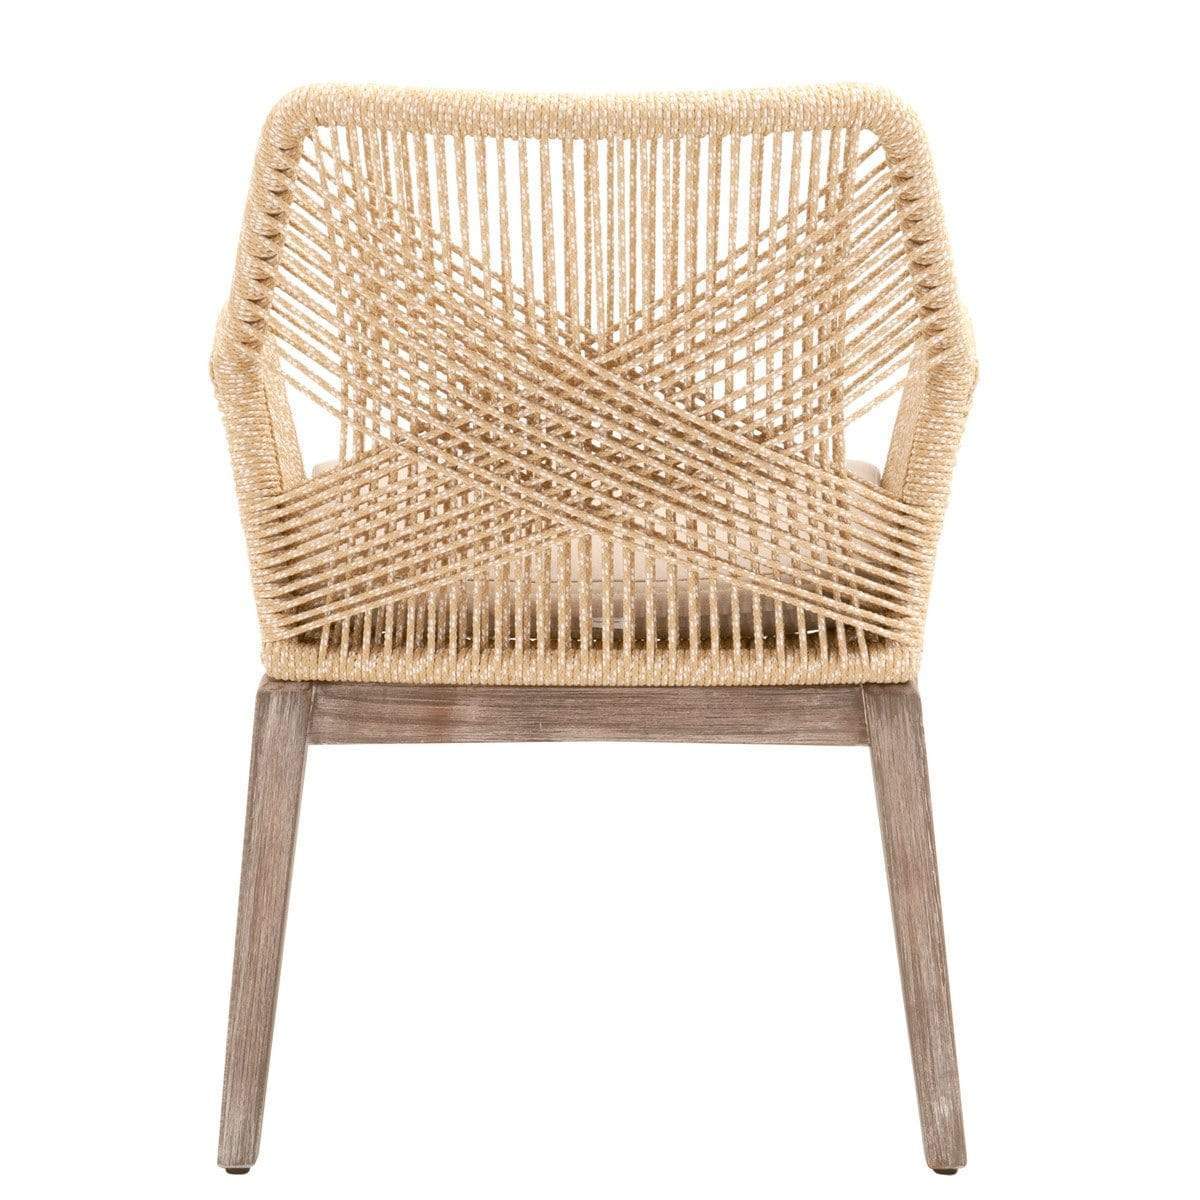 BLU Home Loom Arm Chair - Sand (Set of 2) Furniture orient-express-6809KD.SND/FLGRY/NG 00842279106065